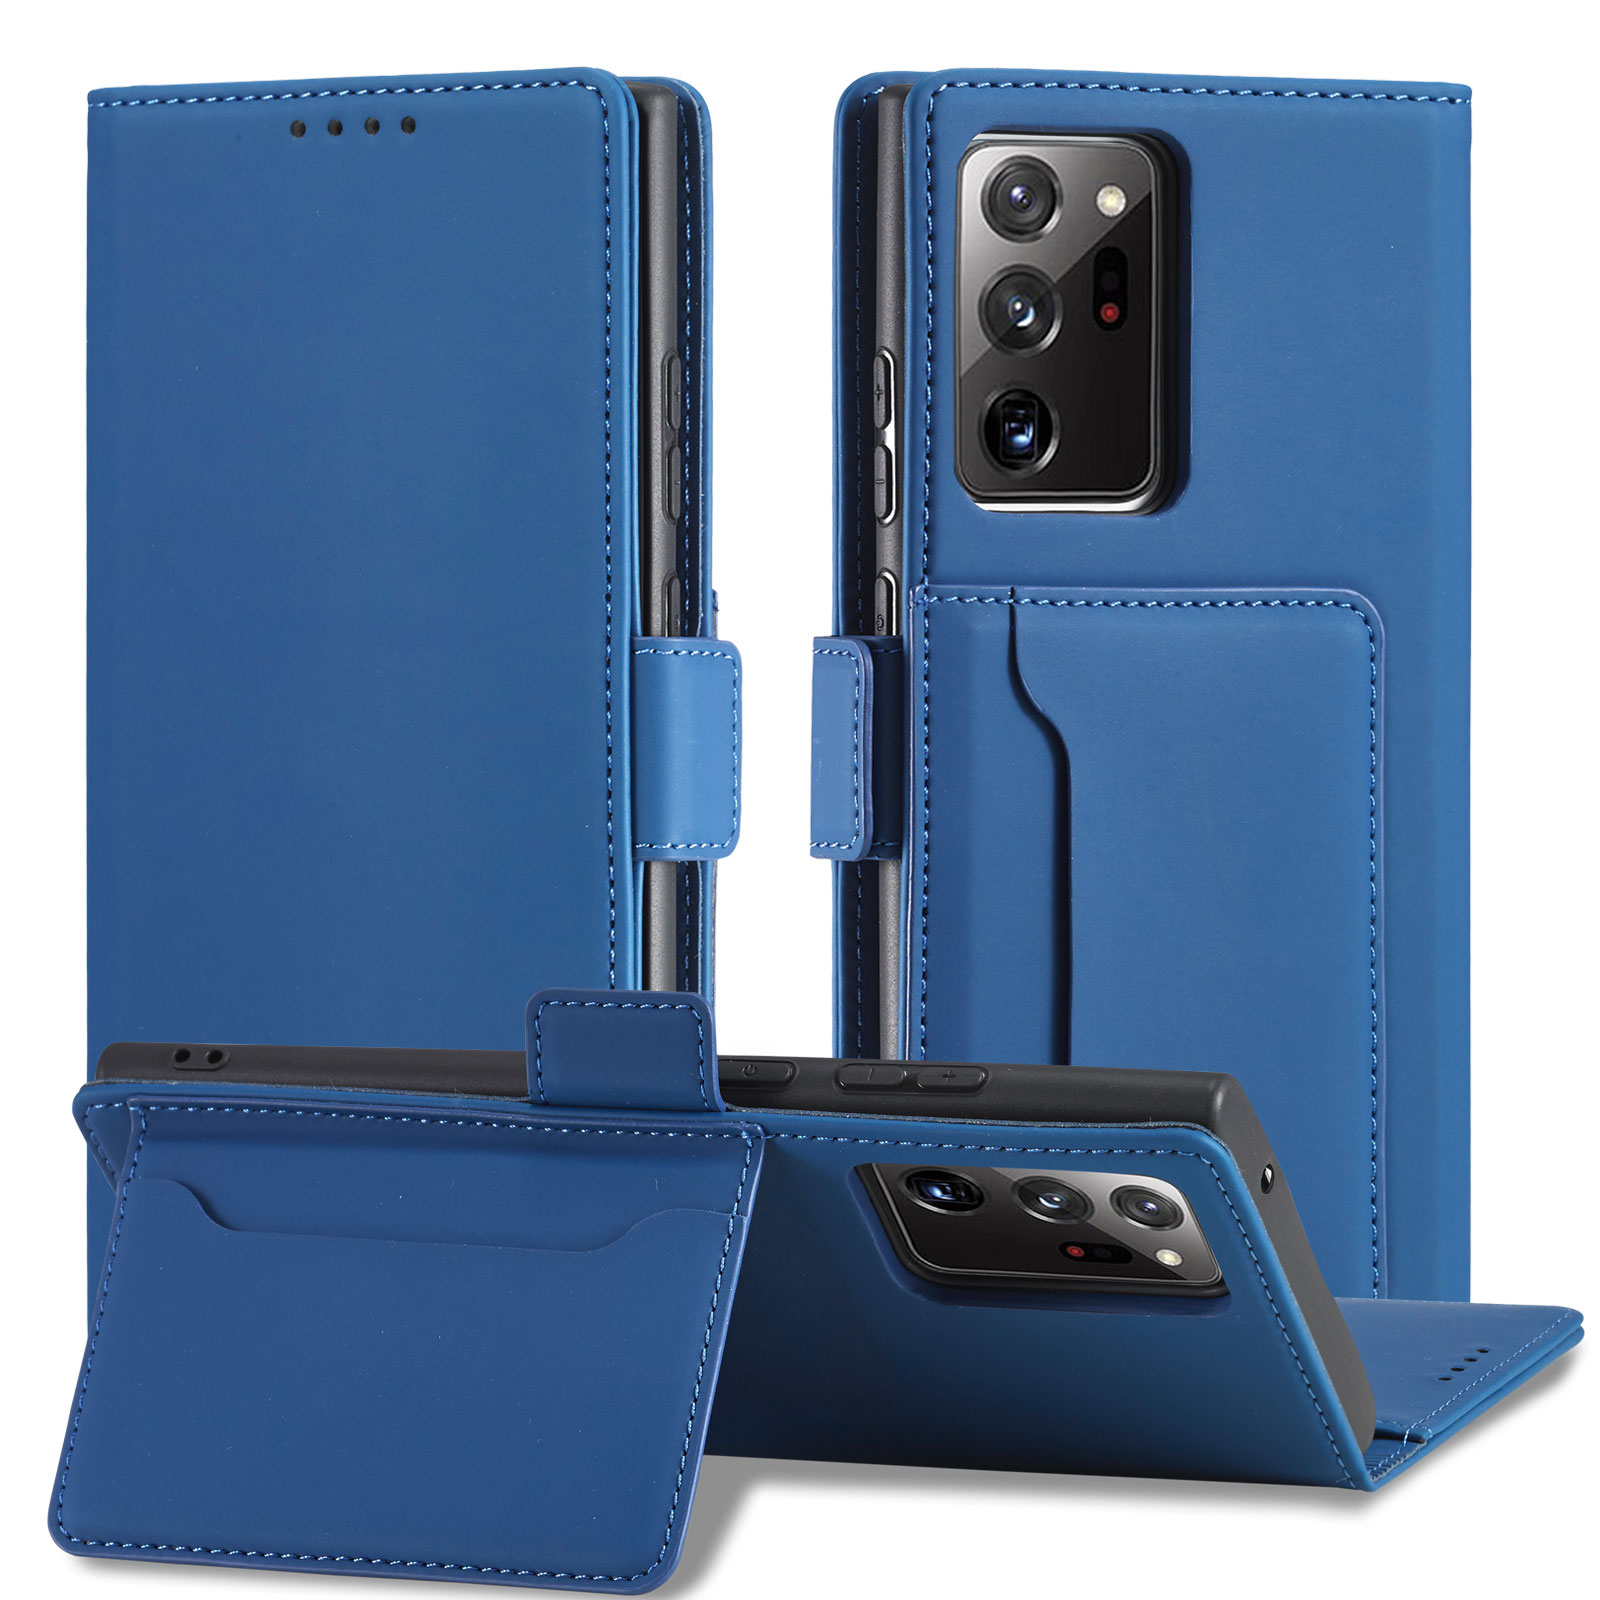 Bakeey-for-Samsung-Galaxy-Note-20-Case-Business-Flip-Magnetic-with-Multi-Card-Slots-Wallet-Shockproo-1763271-18